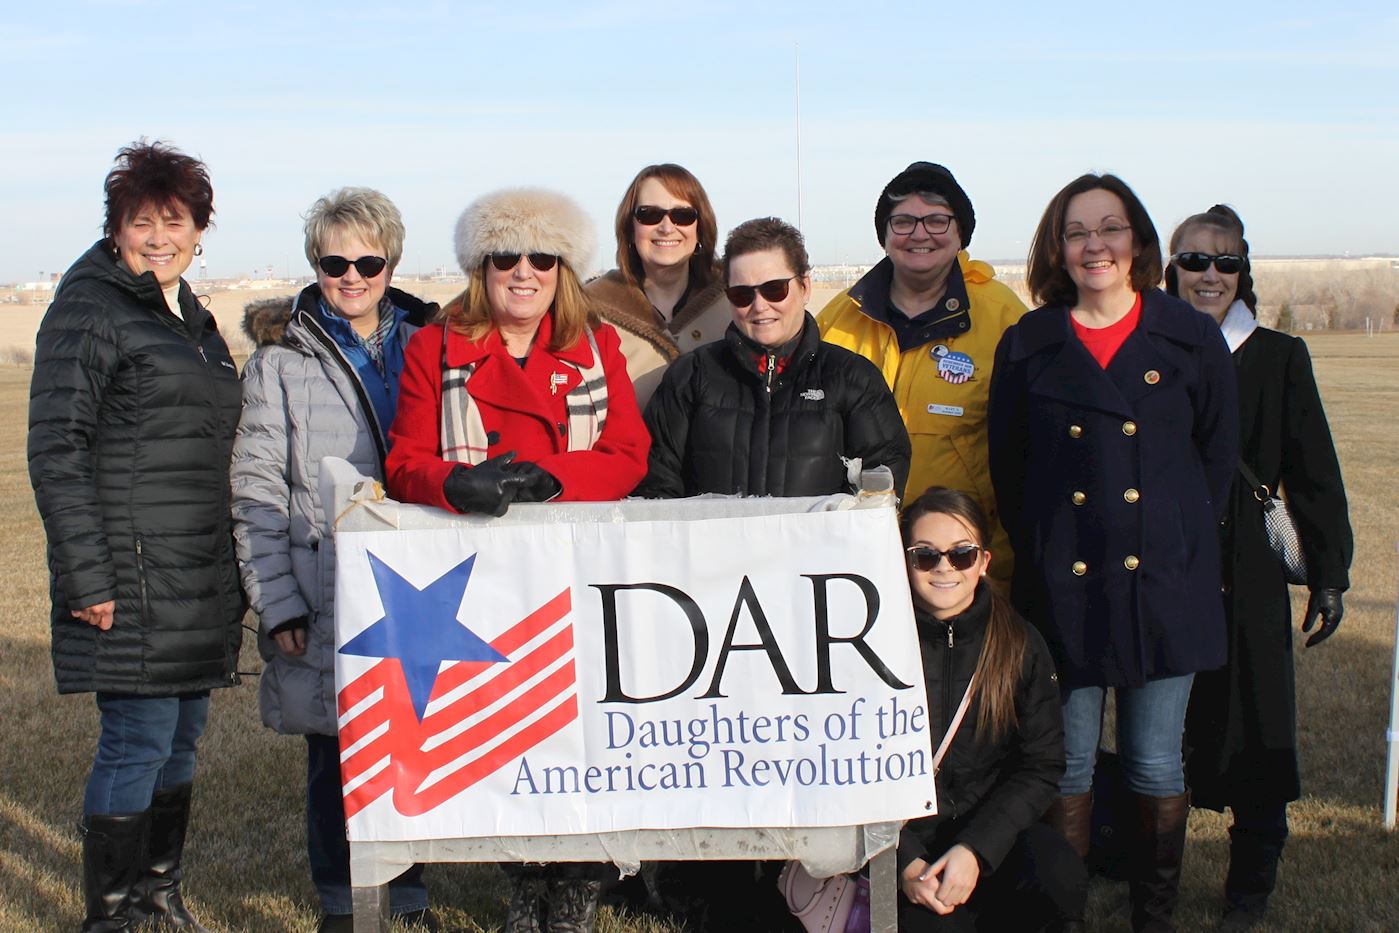 DAR members from the three chapters located in Omaha